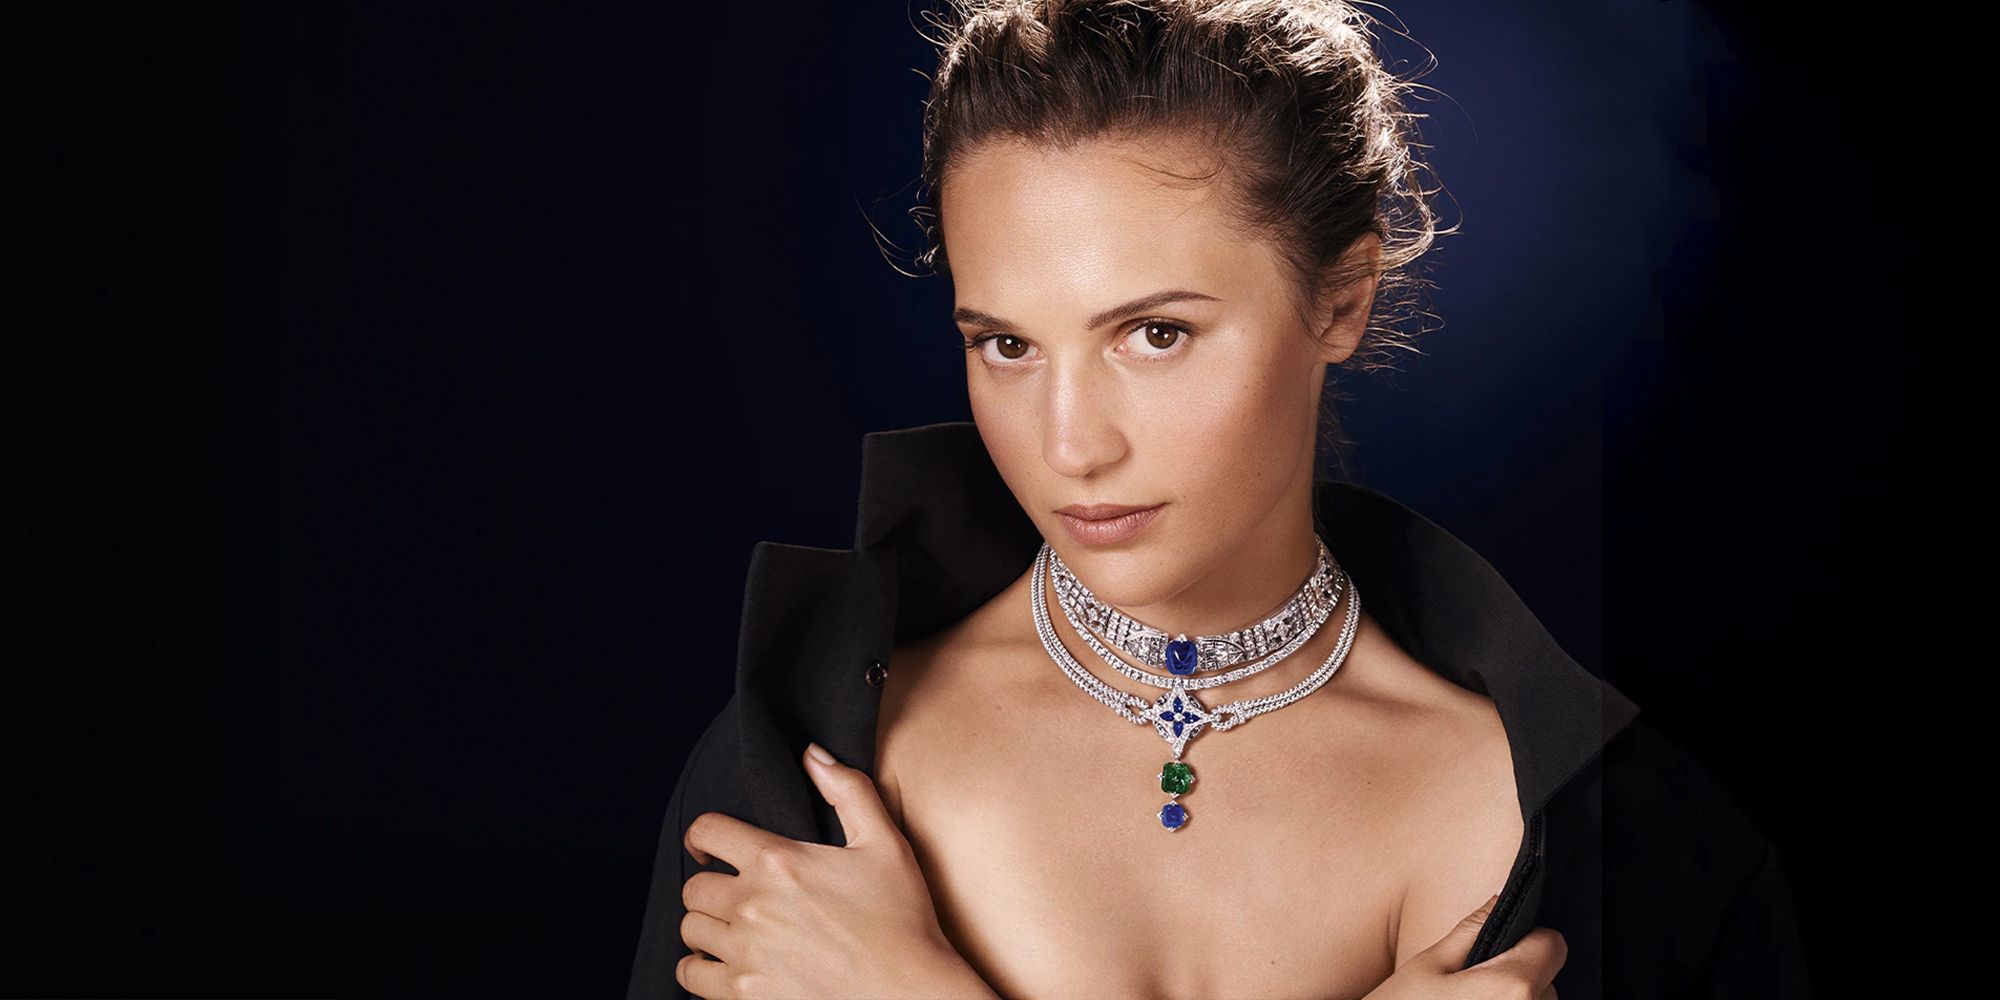 Bravery High Jewelry collection pays tribute to Louis Vuitton's